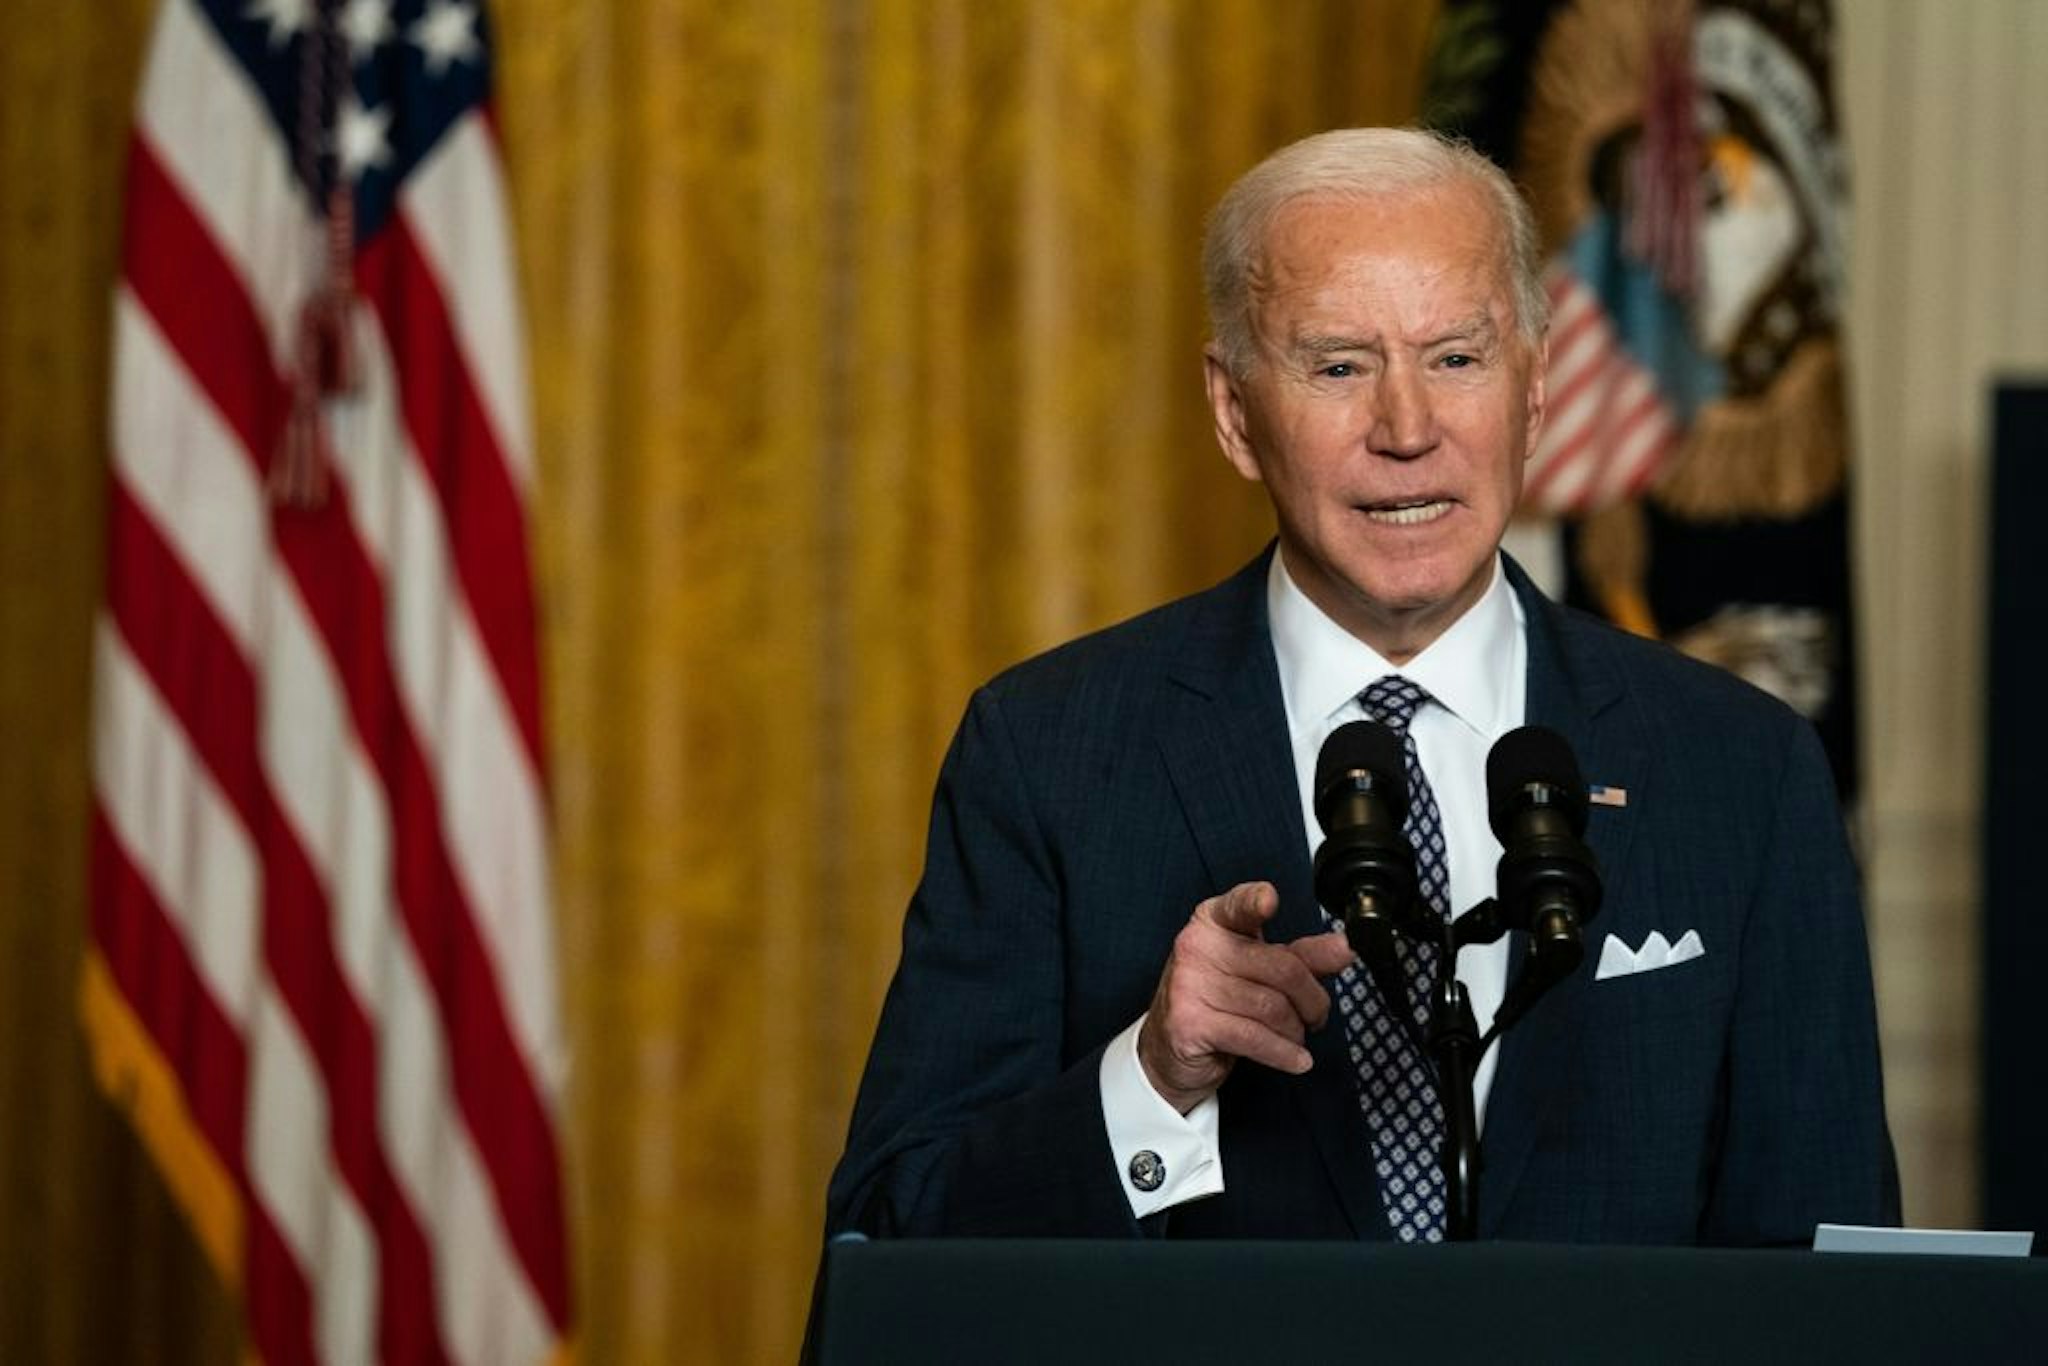 U.S. President Joe Biden speaks while addressing the virtual Munich Security Conference in the East Room of the White House in Washington, D.C., U.S., on Friday, Feb. 19, 2021. Biden re-introduced himself and the U.S. to world leaders at a pair of international conferences today, calling on industrialized democracies to partner in confronting the pandemic and climate change in a sharp departure from his predecessor's foreign policy.